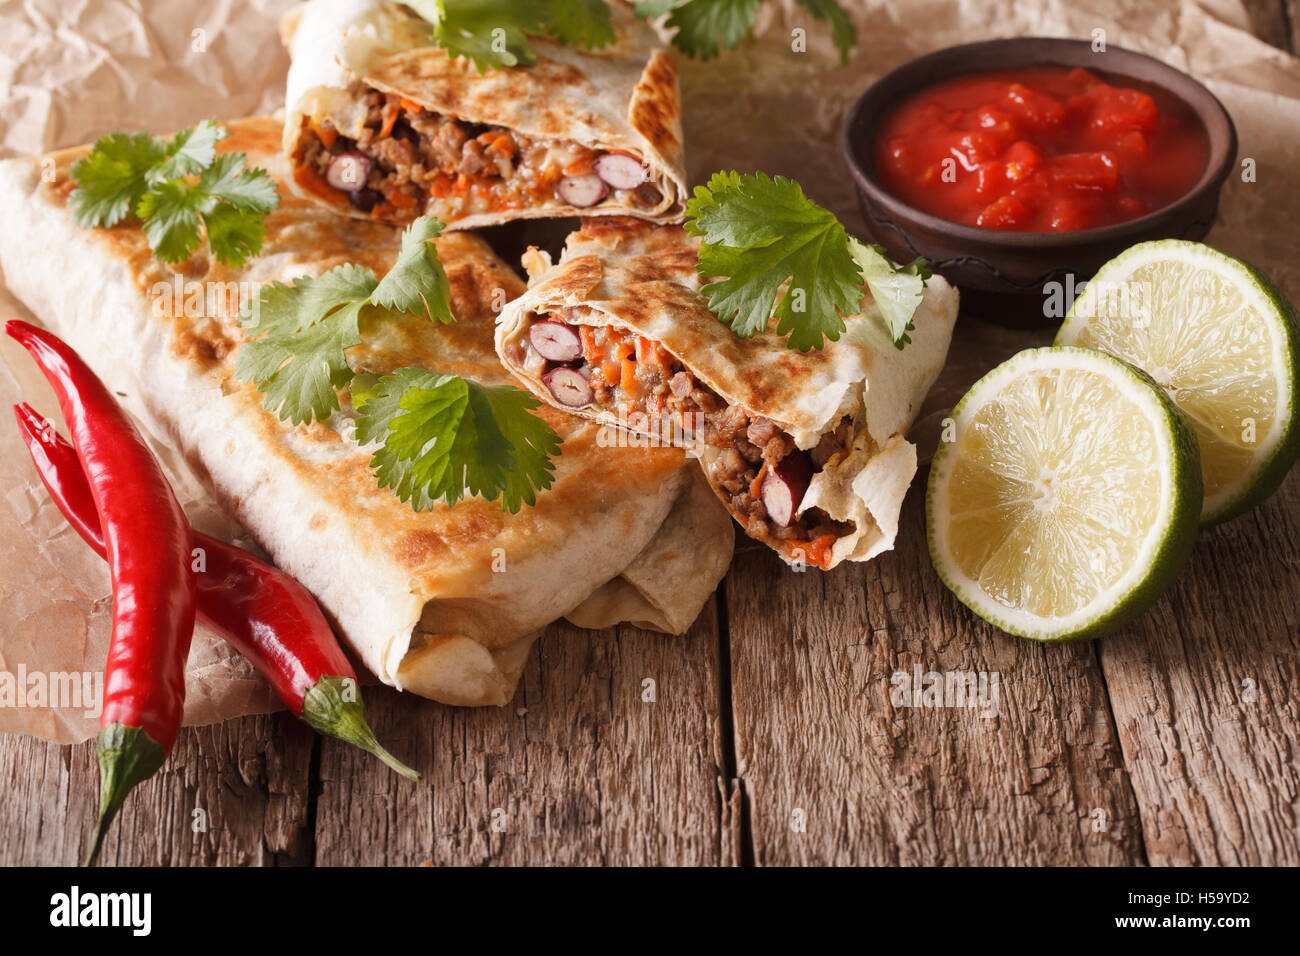 Mexican Food: chimichanga with meat and vegetables close-up on the table. horizontal Stock Photo